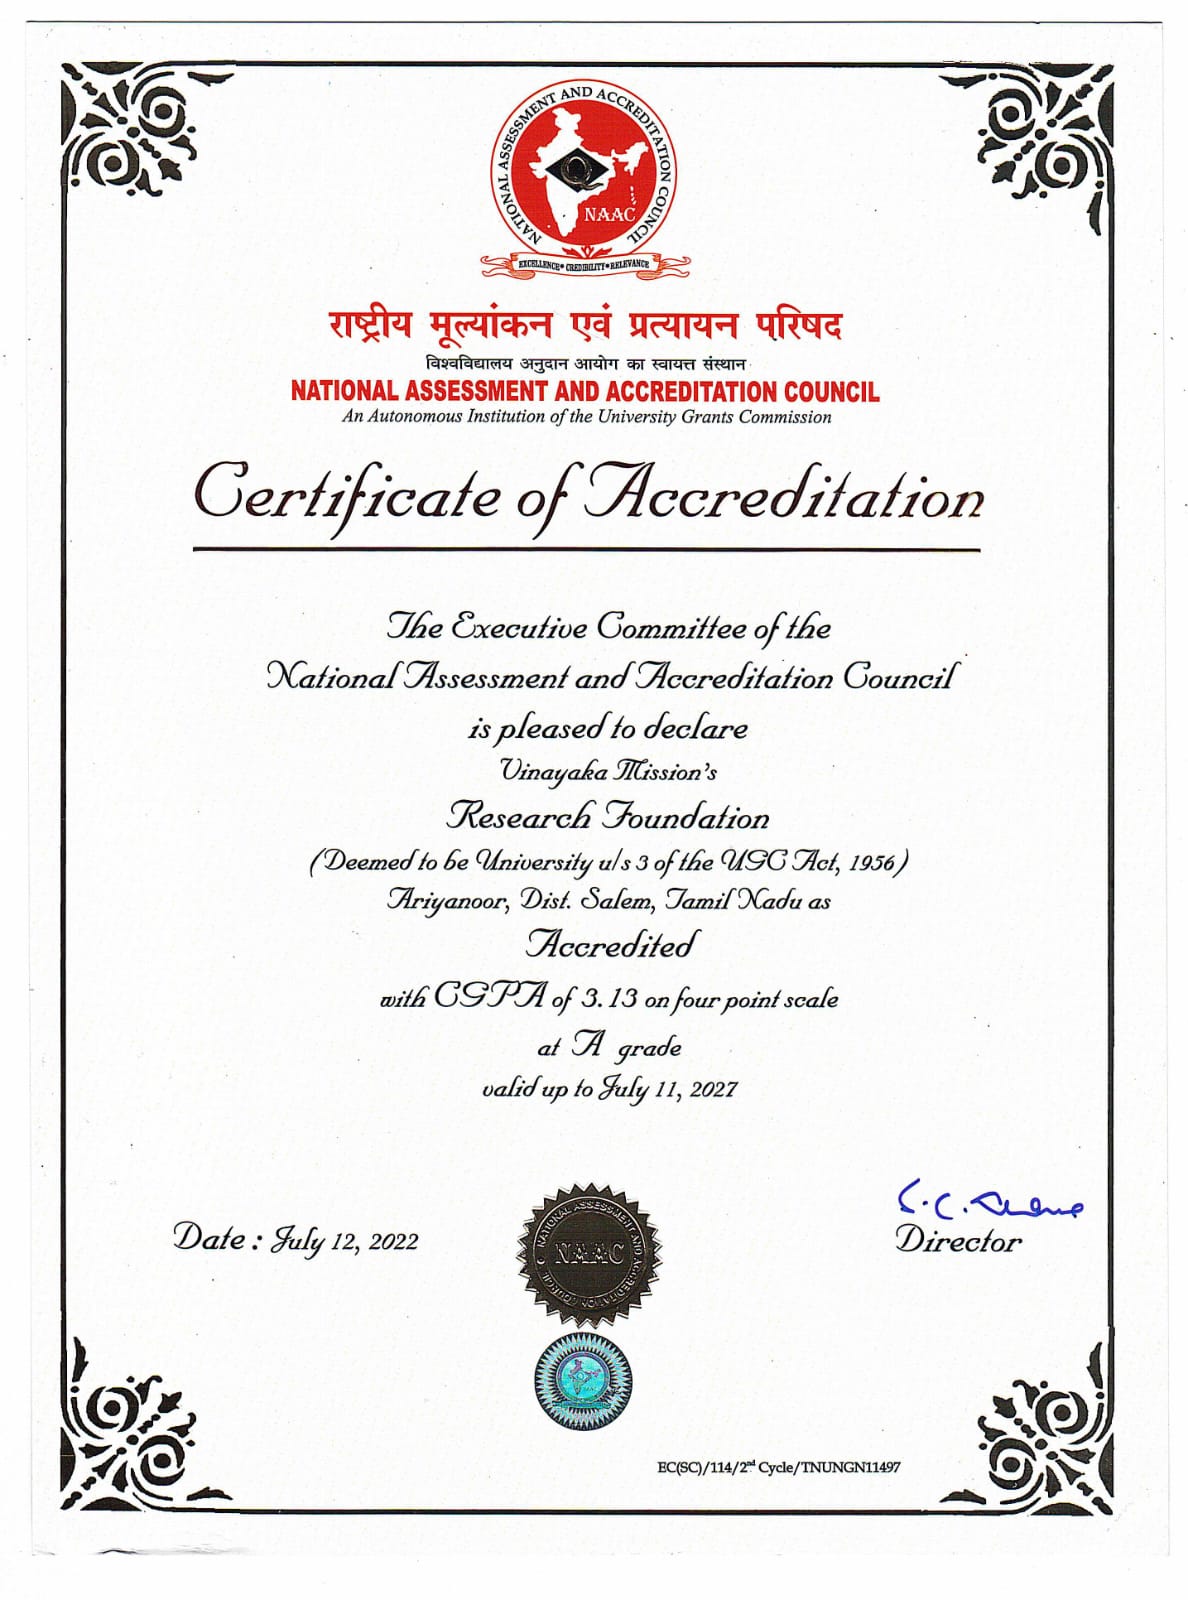 Certificate of Accreditation by National Assessment And Accreditation Council